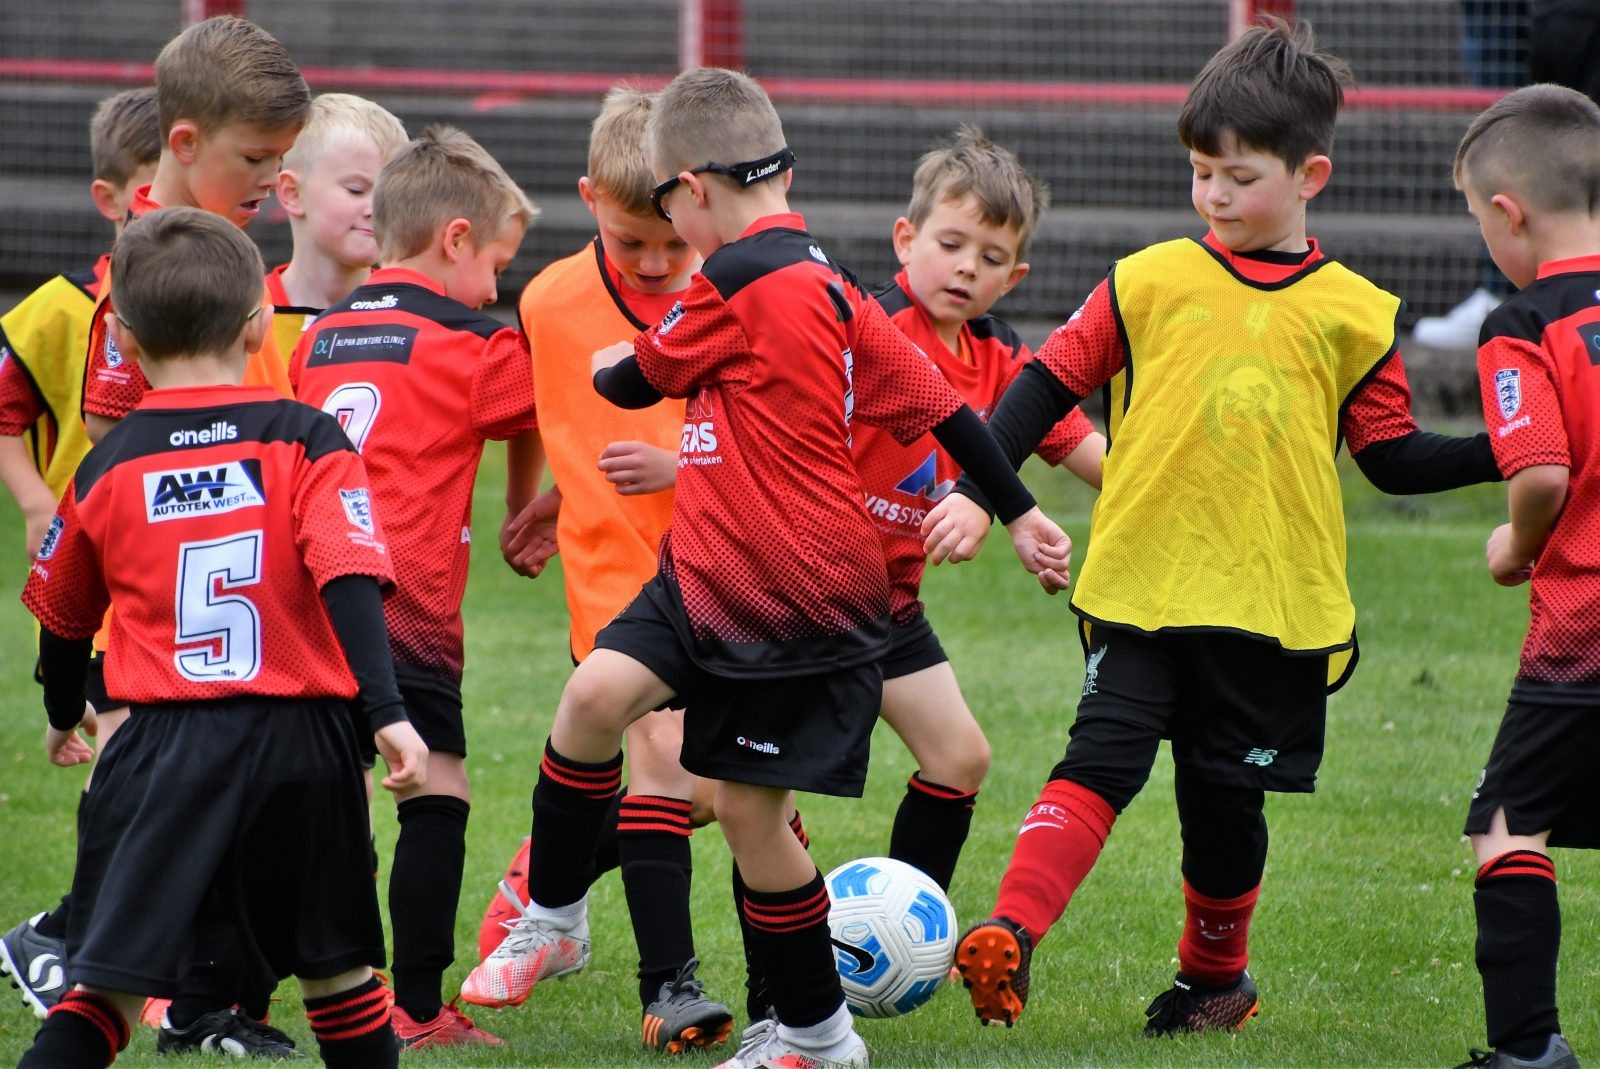 Reds Festival of Football – Juniors in action